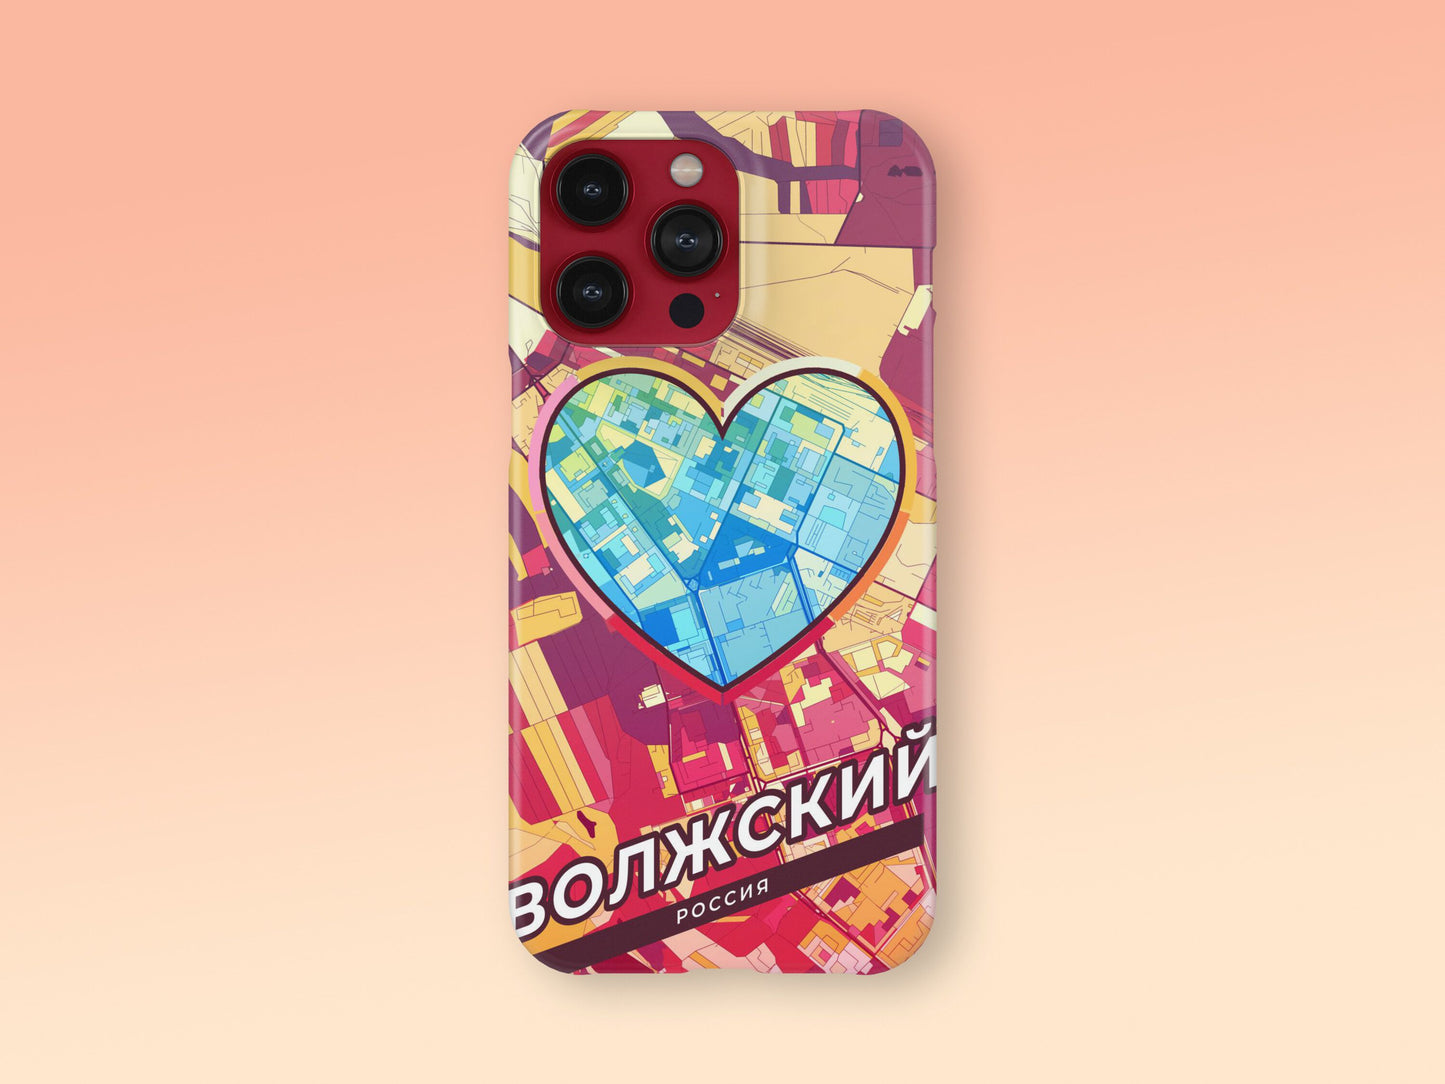 Volzhsky Russia slim phone case with colorful icon 2